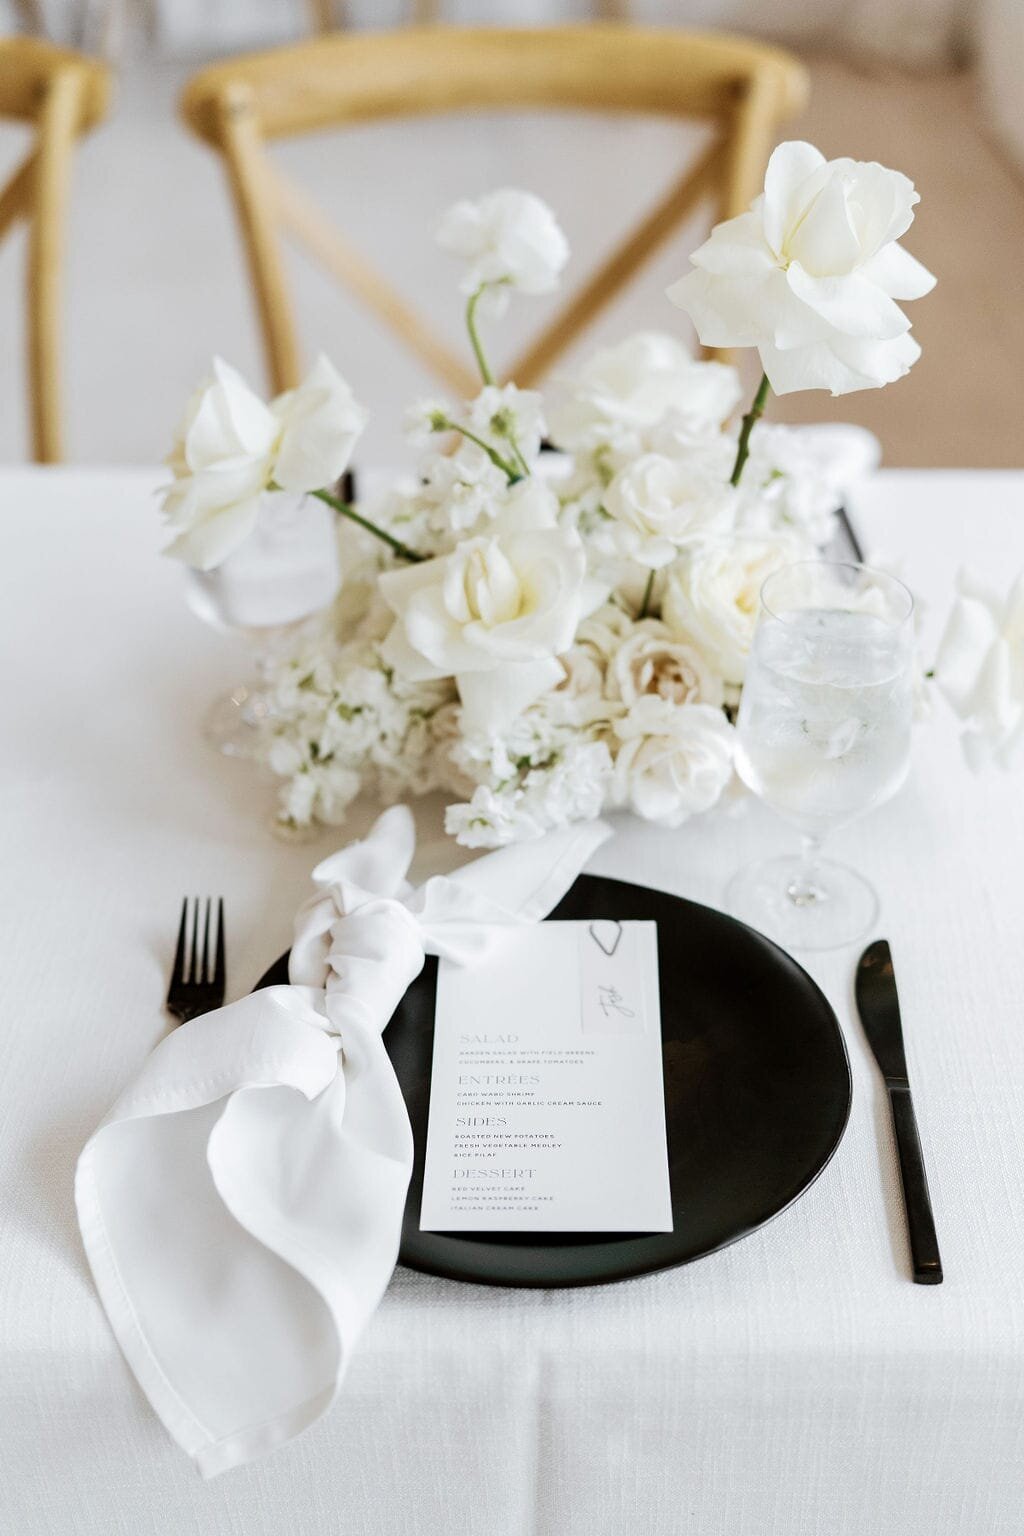 Black and white wedding table